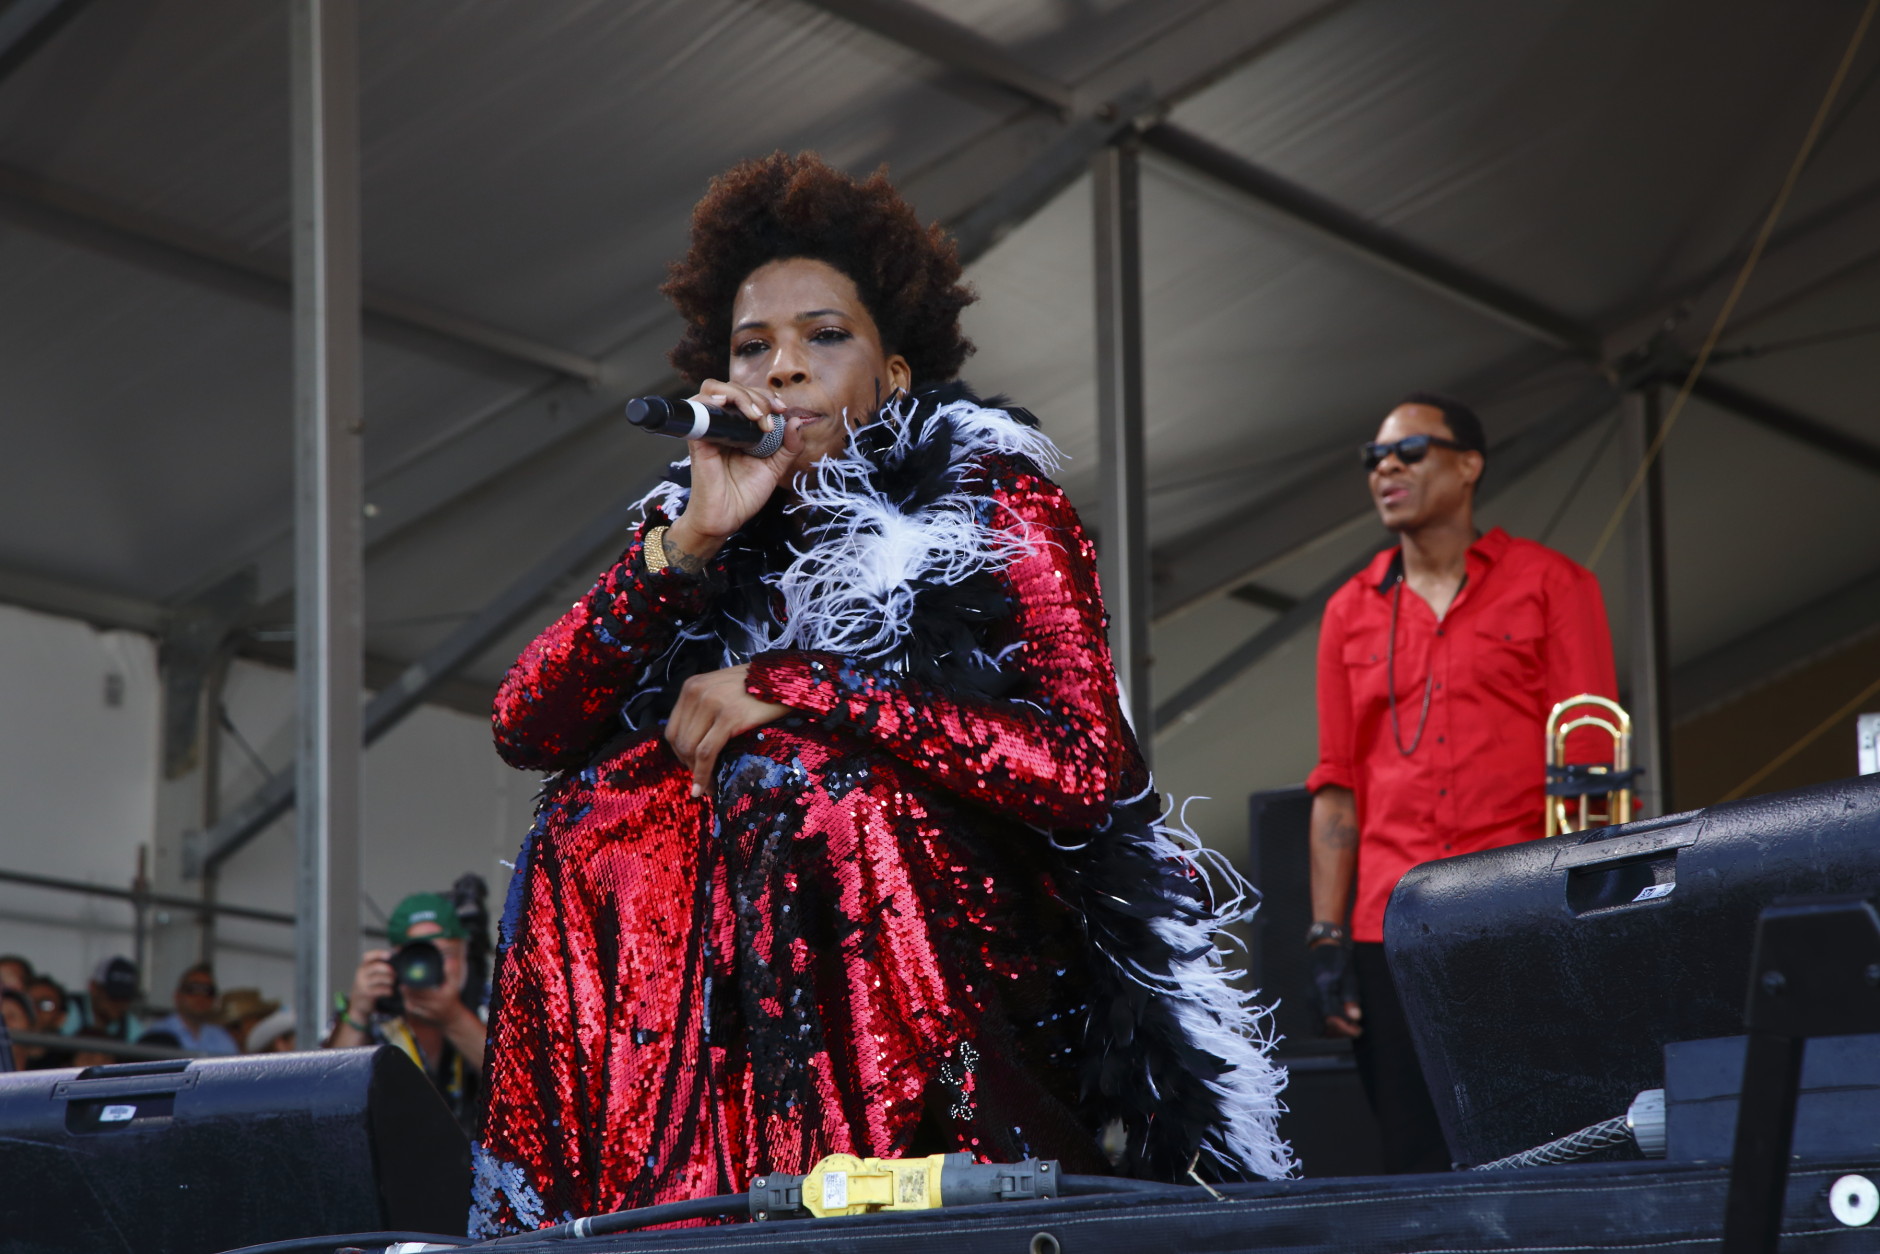 Macy Gray performs with Galactic at the New Orleans Jazz &amp; Heritage Festival on Friday, May 1, 2015, in New Orleans, Louisiana. (Photo by John Davisson/Invision/AP)